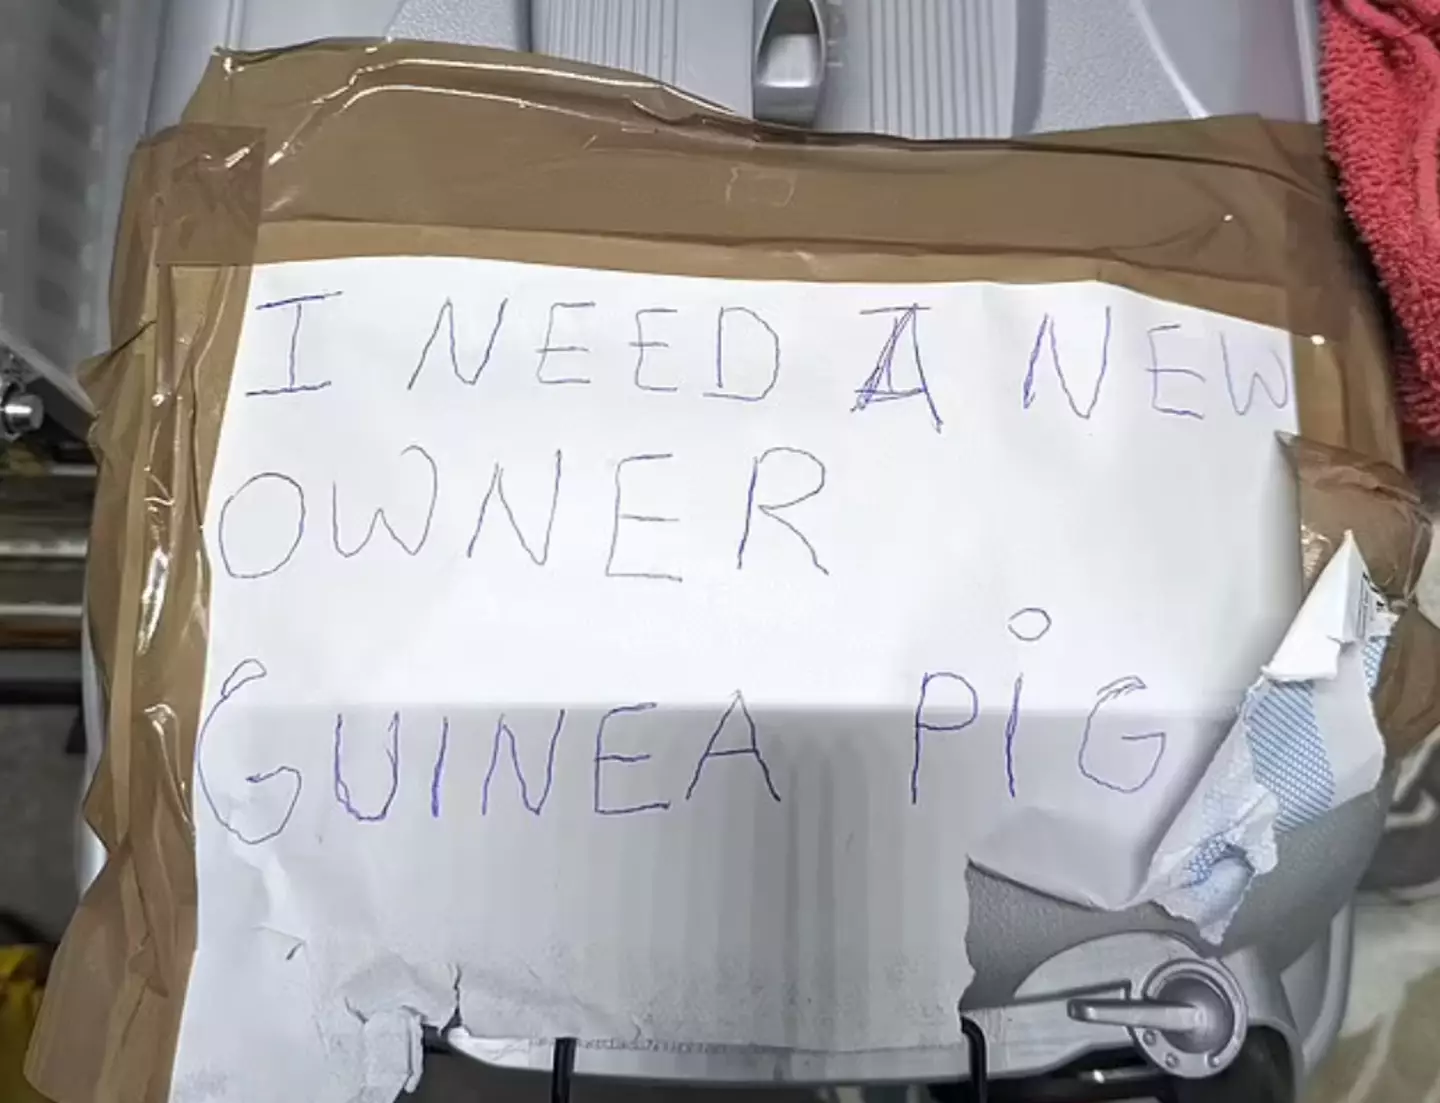 The heartbreaking note found with the guinea pig.